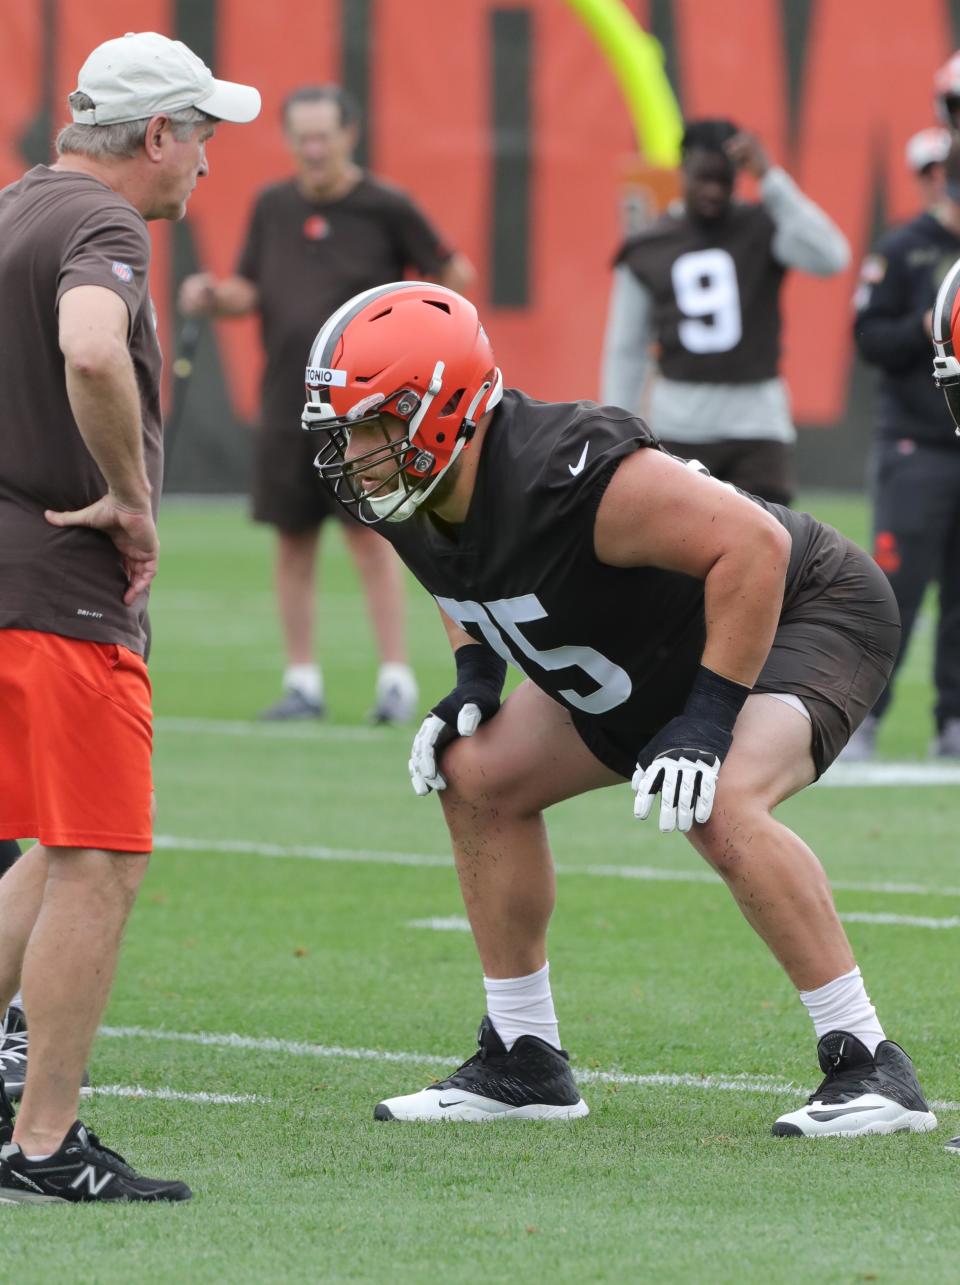 Cleveland Browns offensive lineman Joel Bitonio lines up in front of coach Bill Callahan during minicamp on Tuesday, June 14, 2022 in Berea.